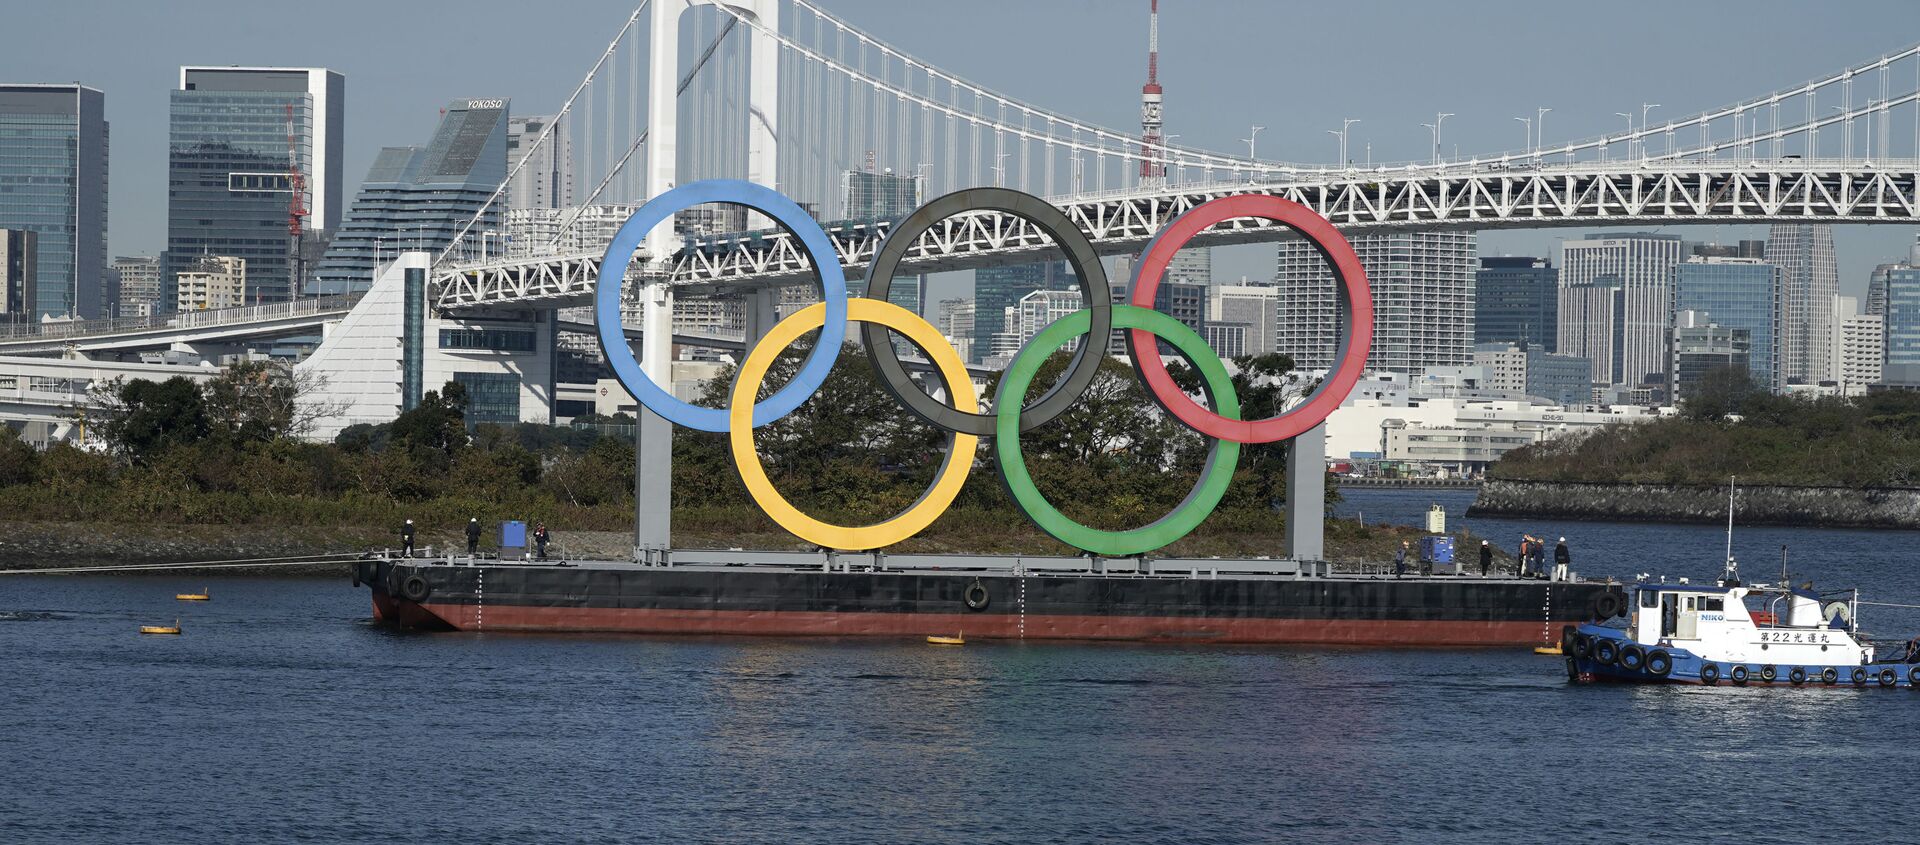 The Olympic Symbol is reinstalled after it was taken down for maintenance ahead of the postponed Tokyo 2020 Olympics in the Odaiba section Tuesday, Dec. 1, 2020, in Tokyo. - Sputnik International, 1920, 23.04.2021